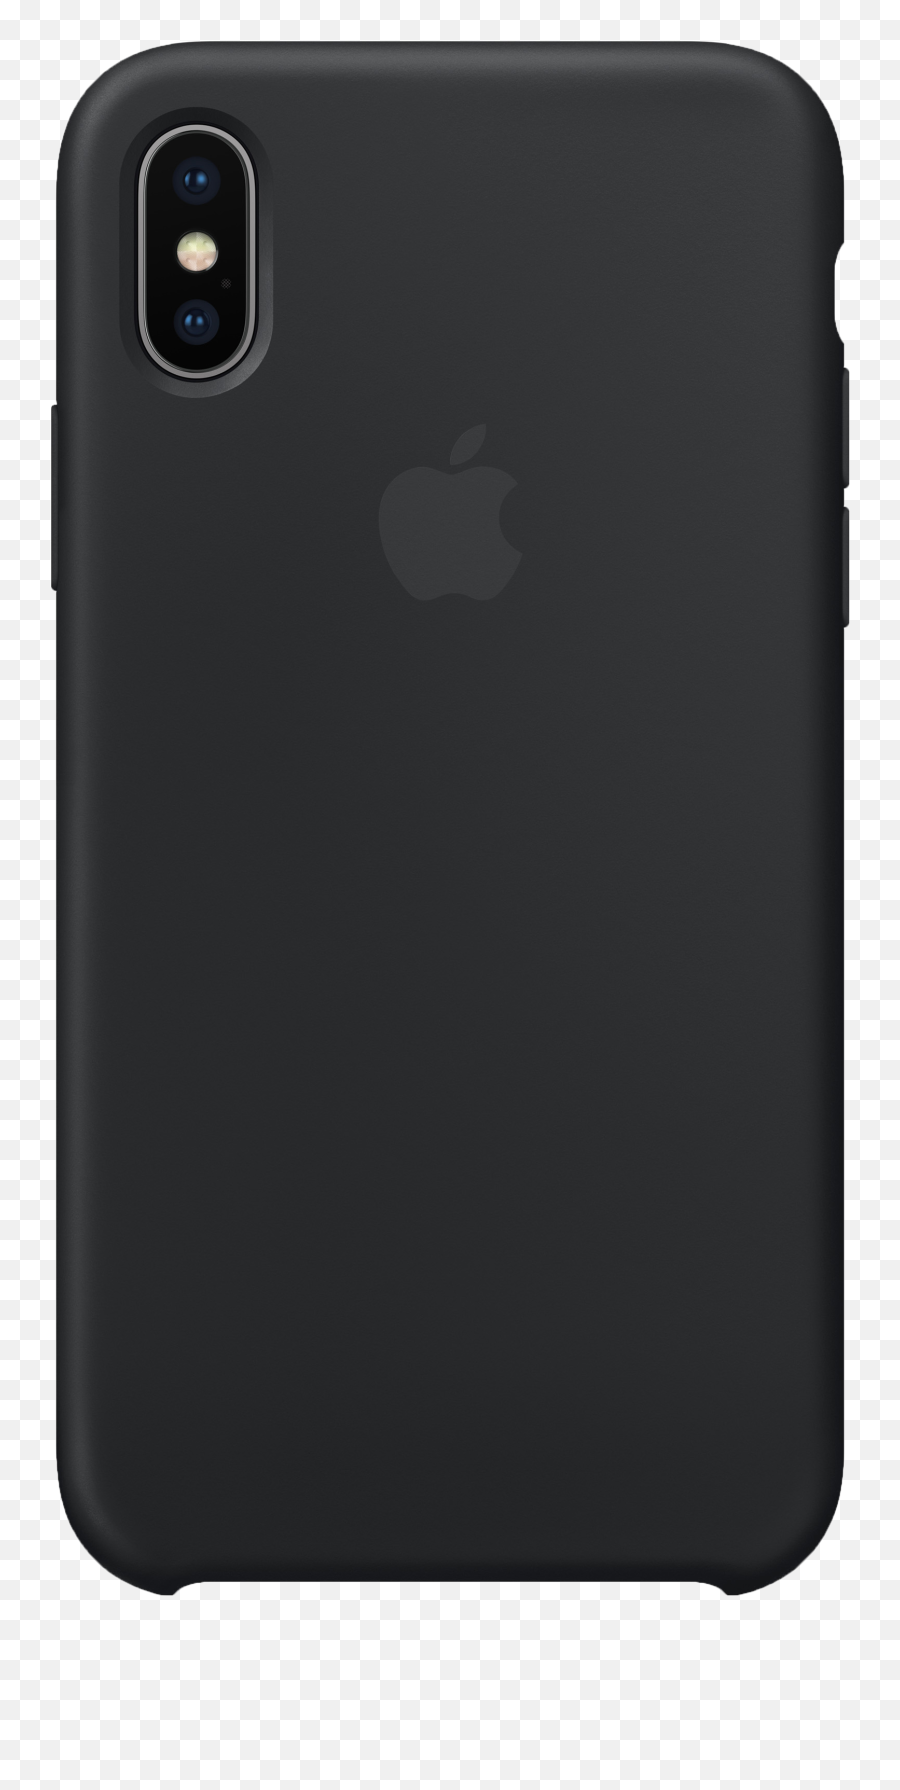 Iphone X Png - Avatan Plus Smartphone,Iphone X Png